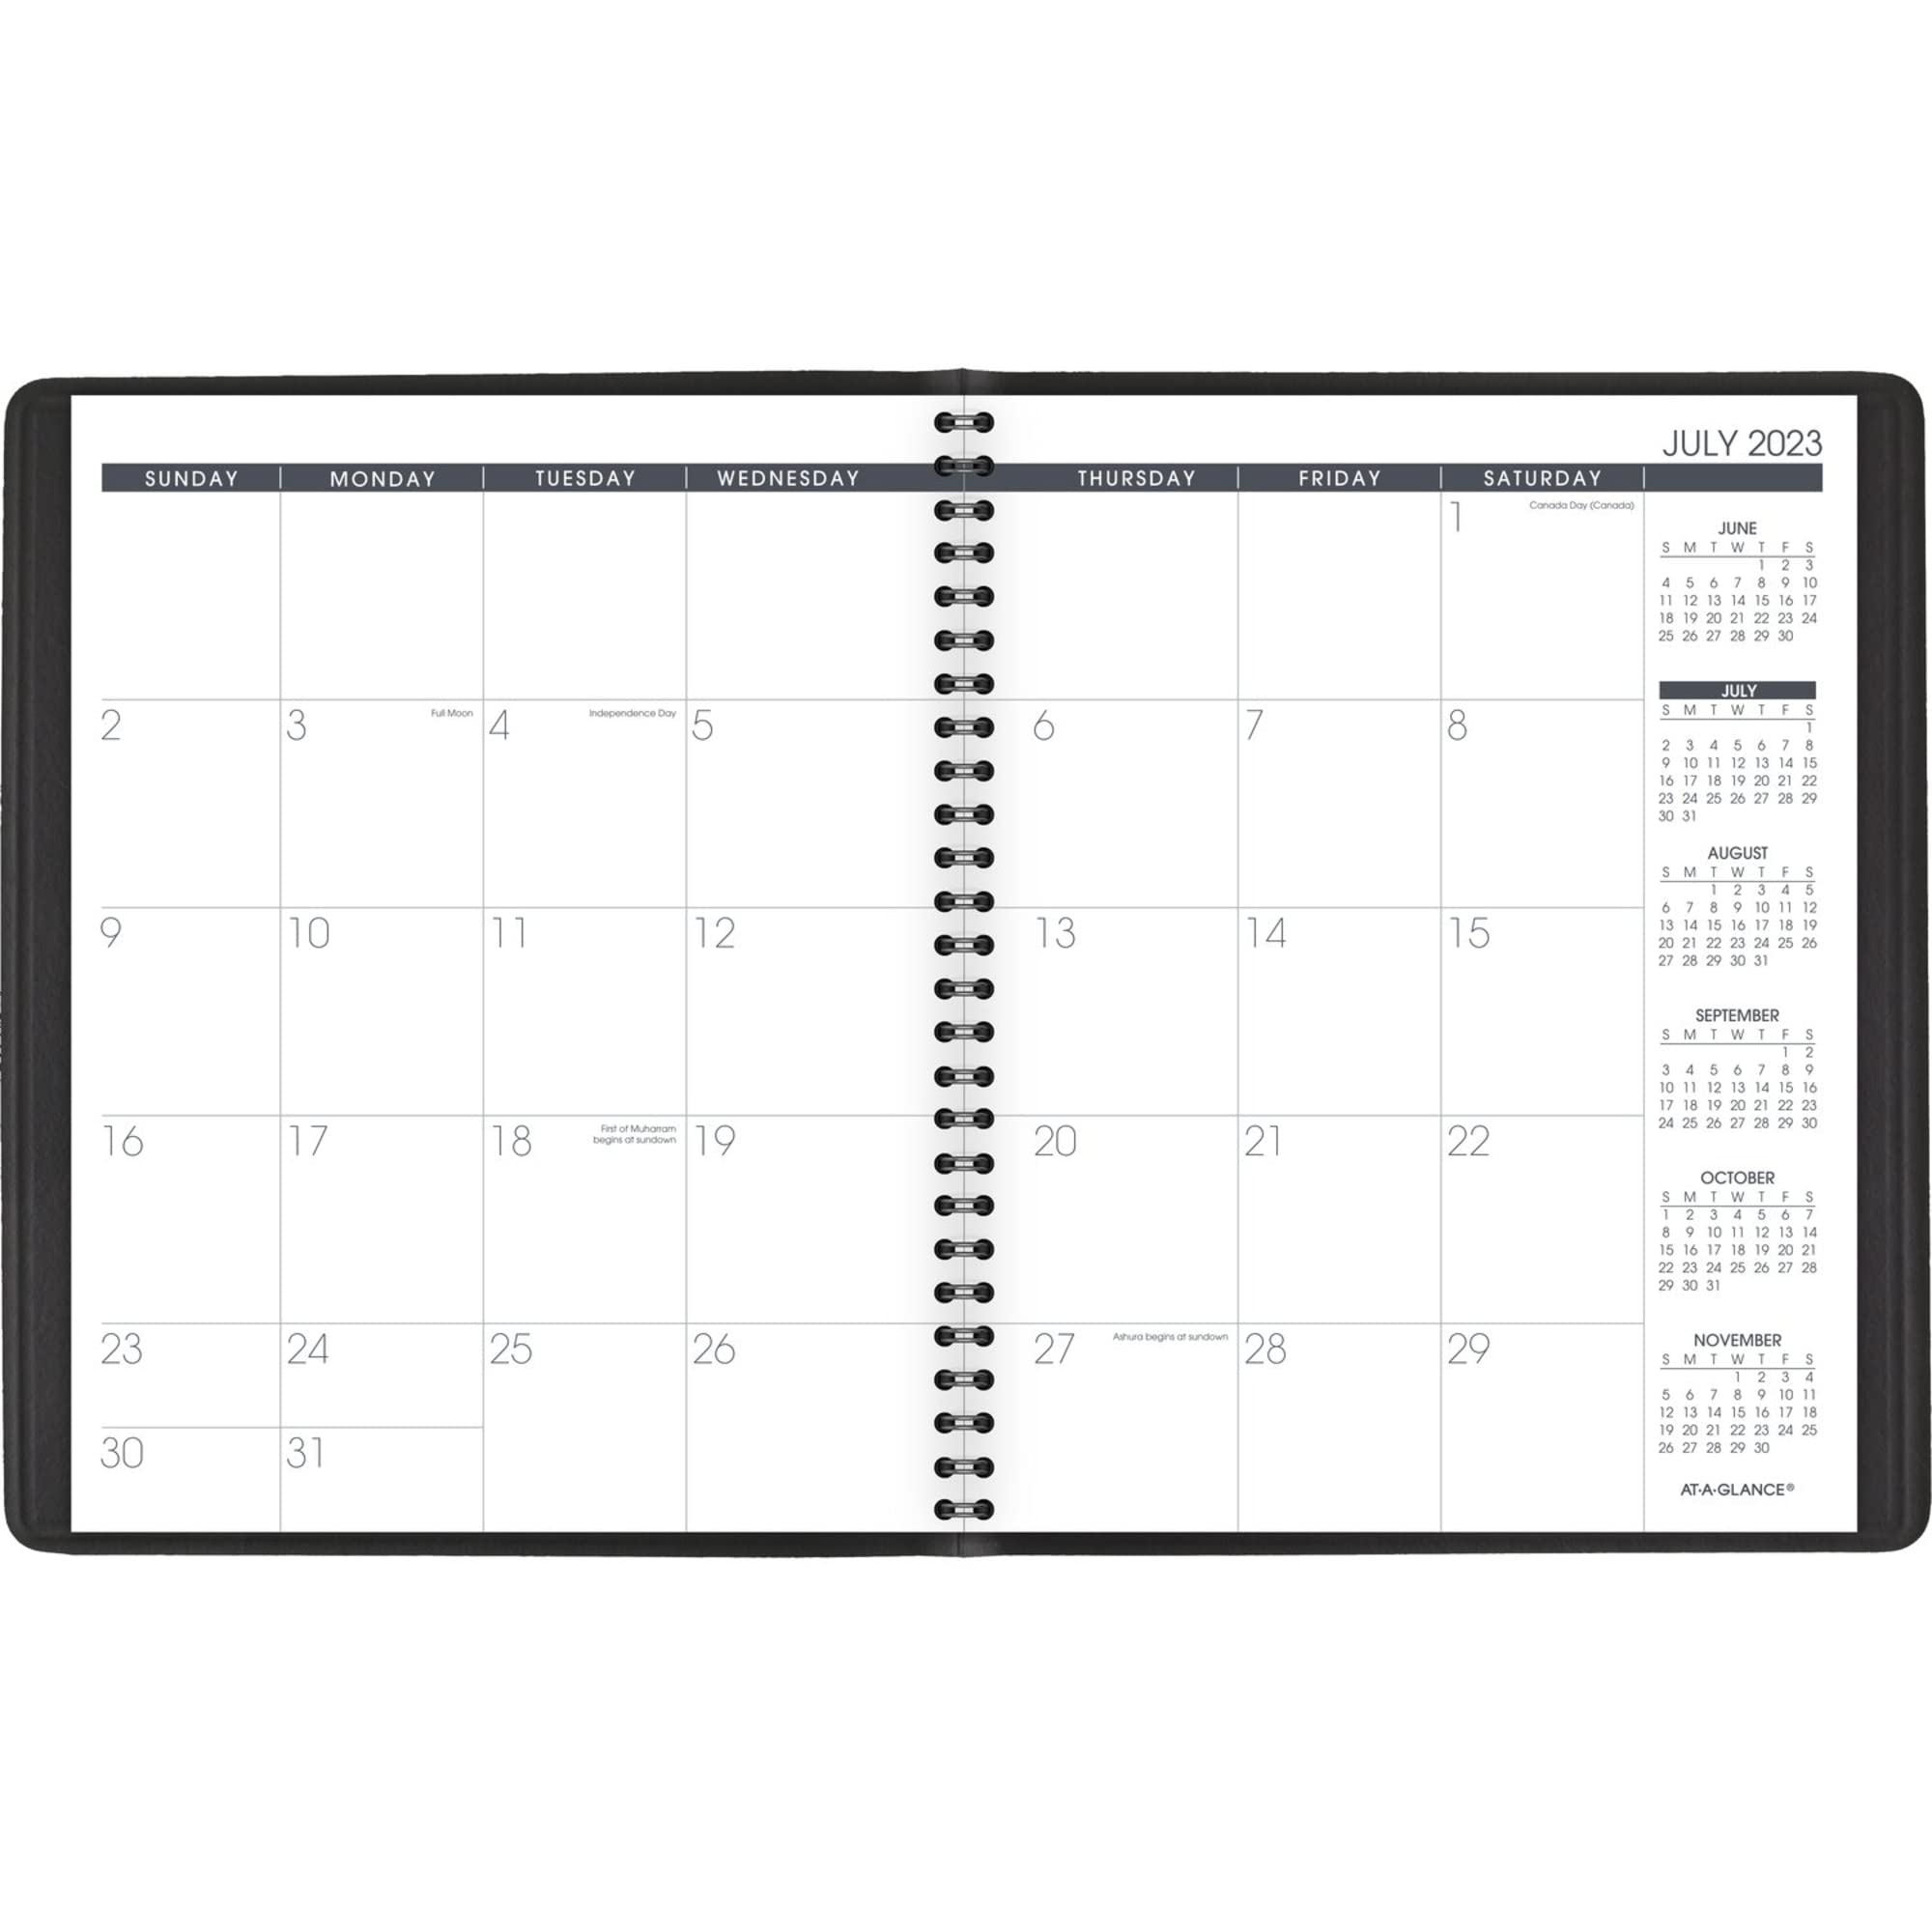 AT-A-GLANCE 2023-2024 Academic Planner, Monthly Appointment Book, 7" x 8-3/4", Medium, Pocket, Flexible Cover, Black (7012705)